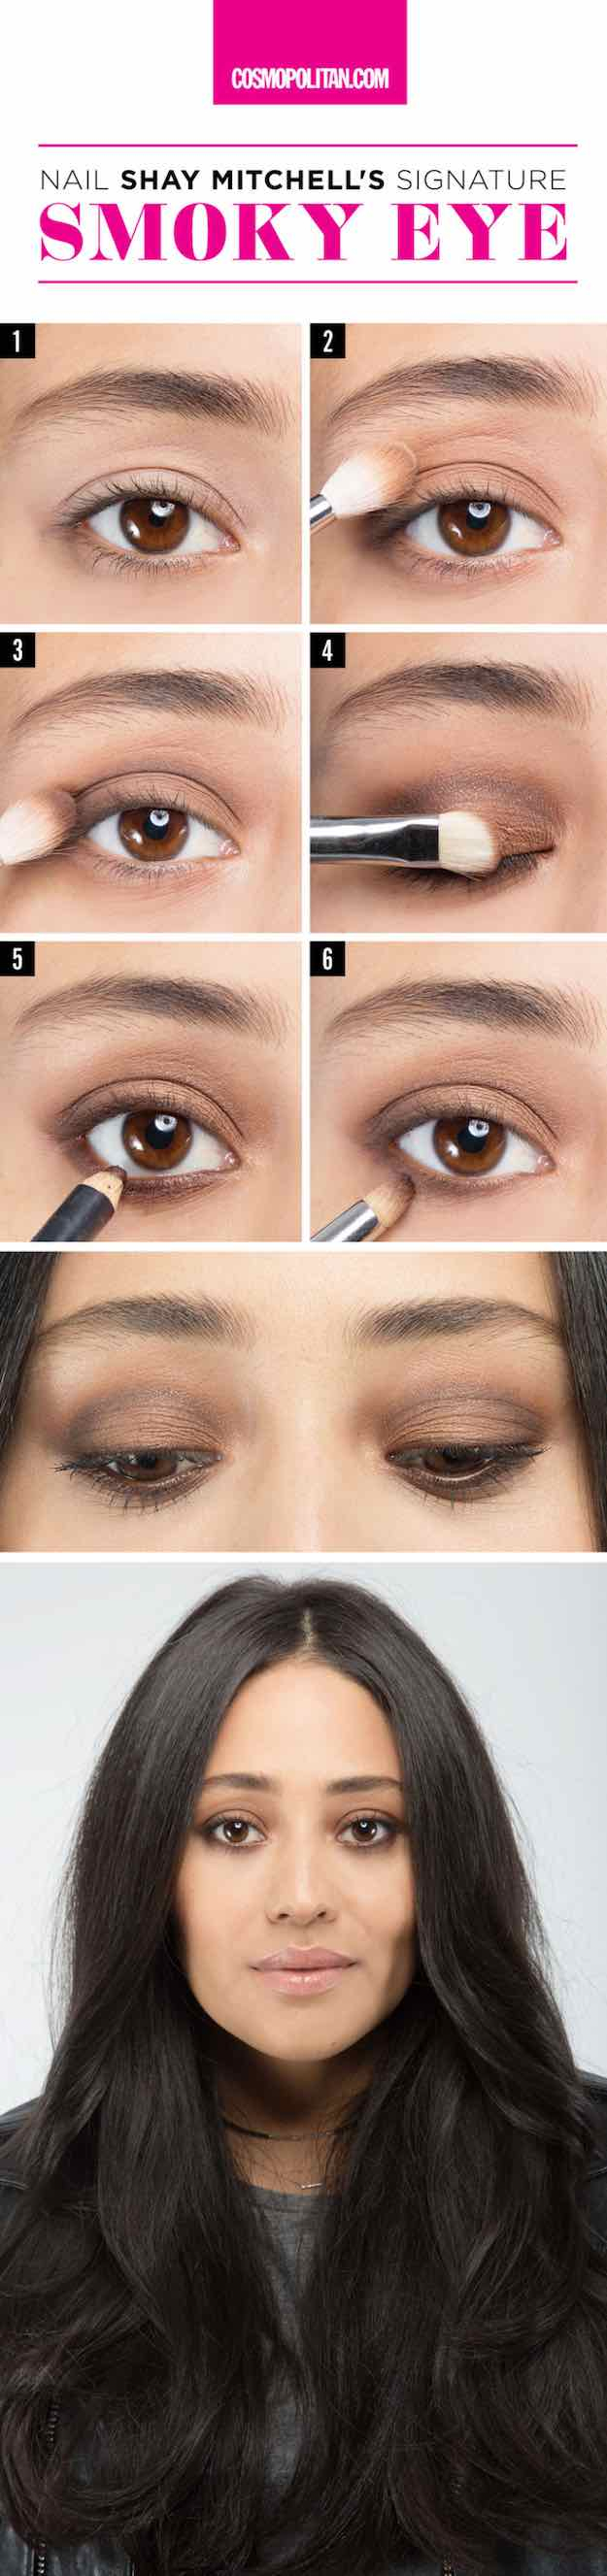 Day Makeup Brown Eyes 31 Awesome Makeup Tutorials For Brown Eyes The Goddess